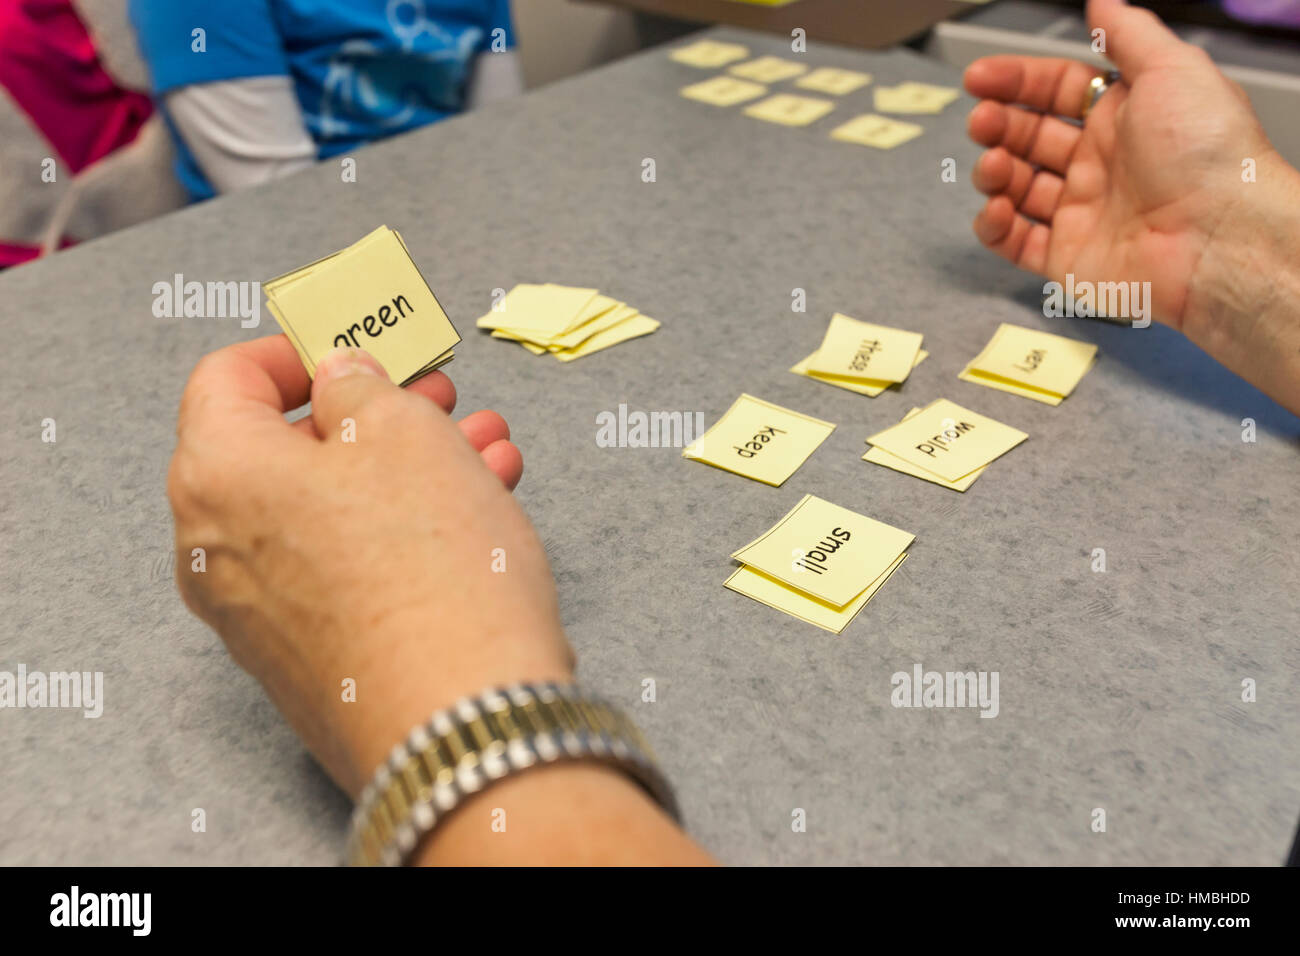 A teacher instructing a student in learning to read. Stock Photo